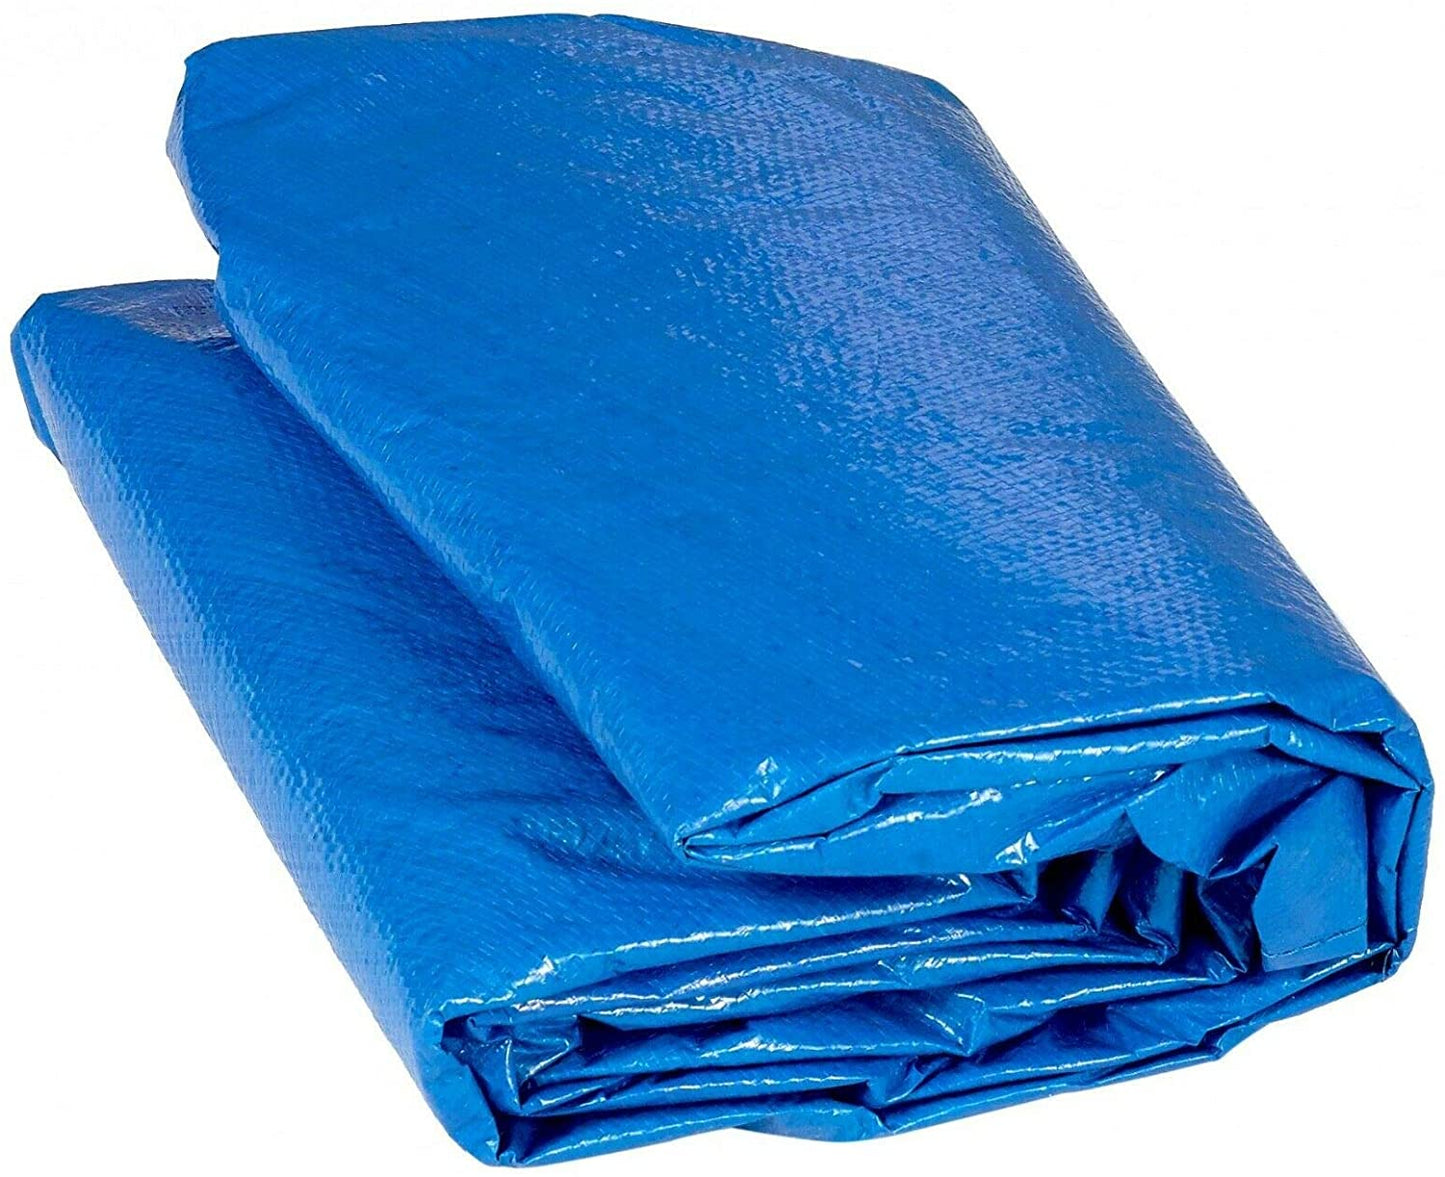 HYGRAD BUILT TO SURVIVE Blue Trampoline Rain Weather Dust Replacement Cover Protector Sheet In 3 Sizes